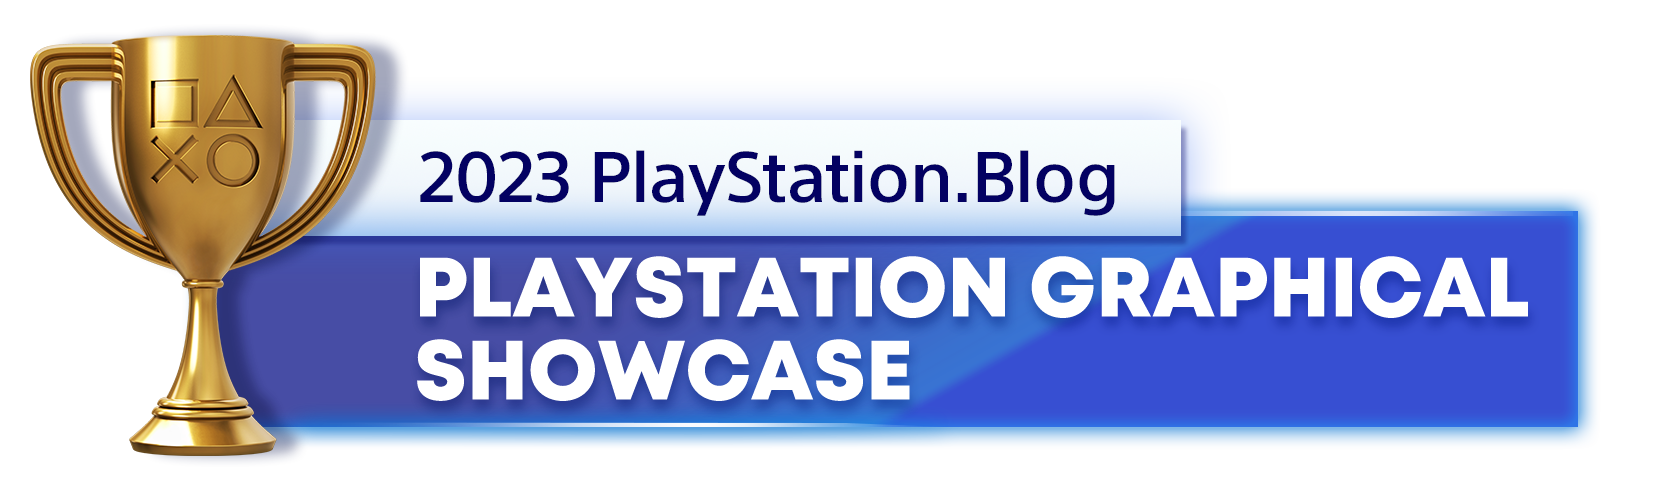  "Gold Trophy for the 2023 PlayStation Blog PlayStation Best Graphical Showcase Winner"